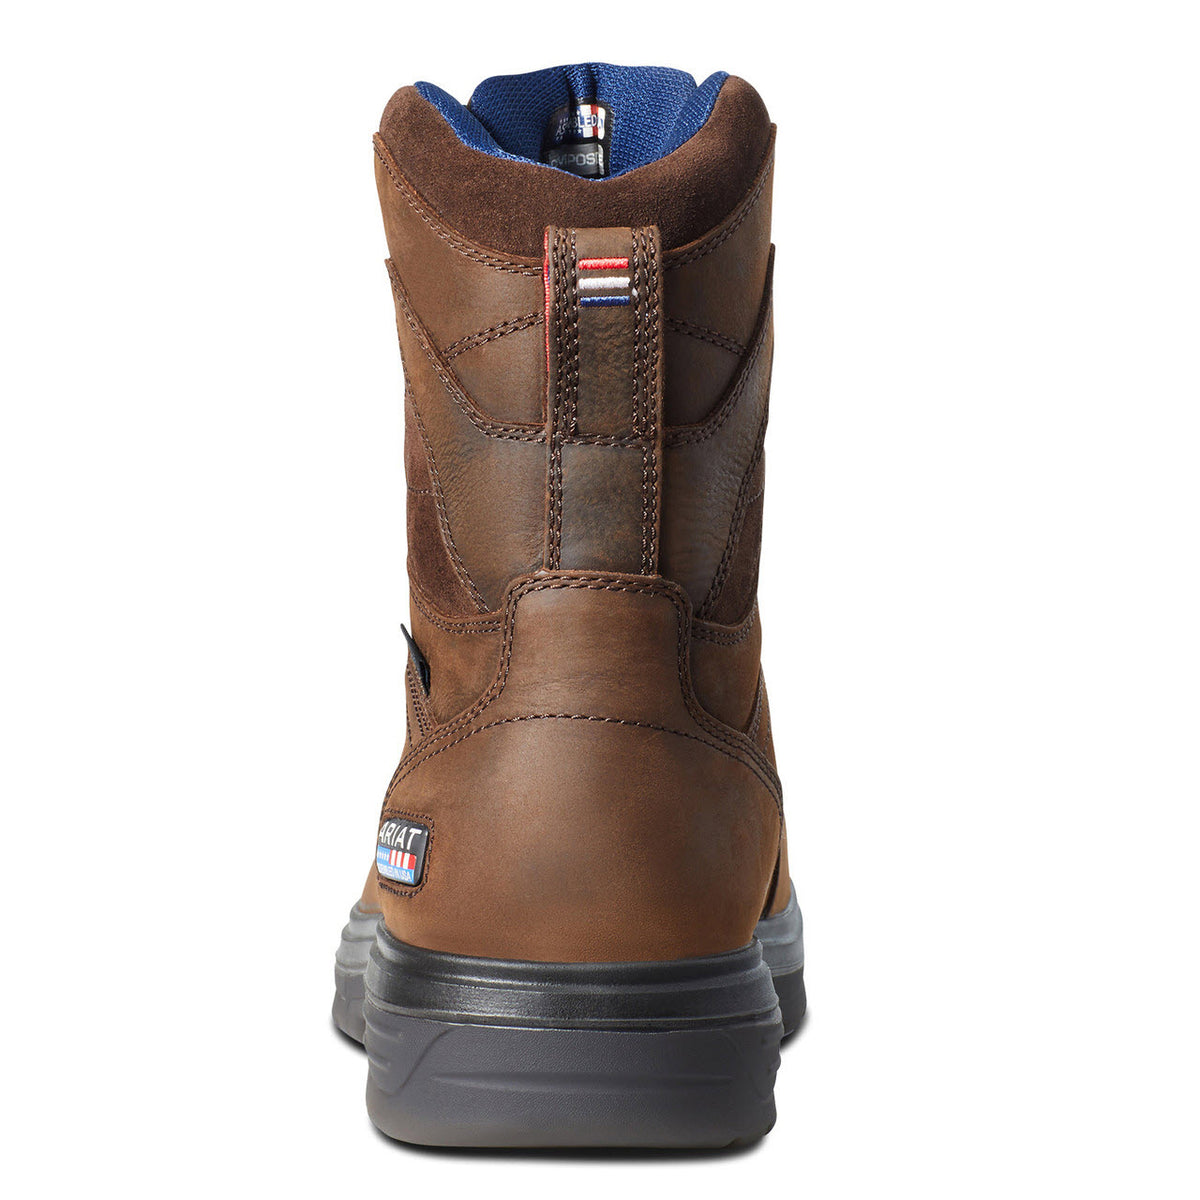 Rear view of a brown leather Ariat work boot with a blue DRYShield waterproof-breathable fabric interior, featuring a pull tab on the back and a thick, grey sole.